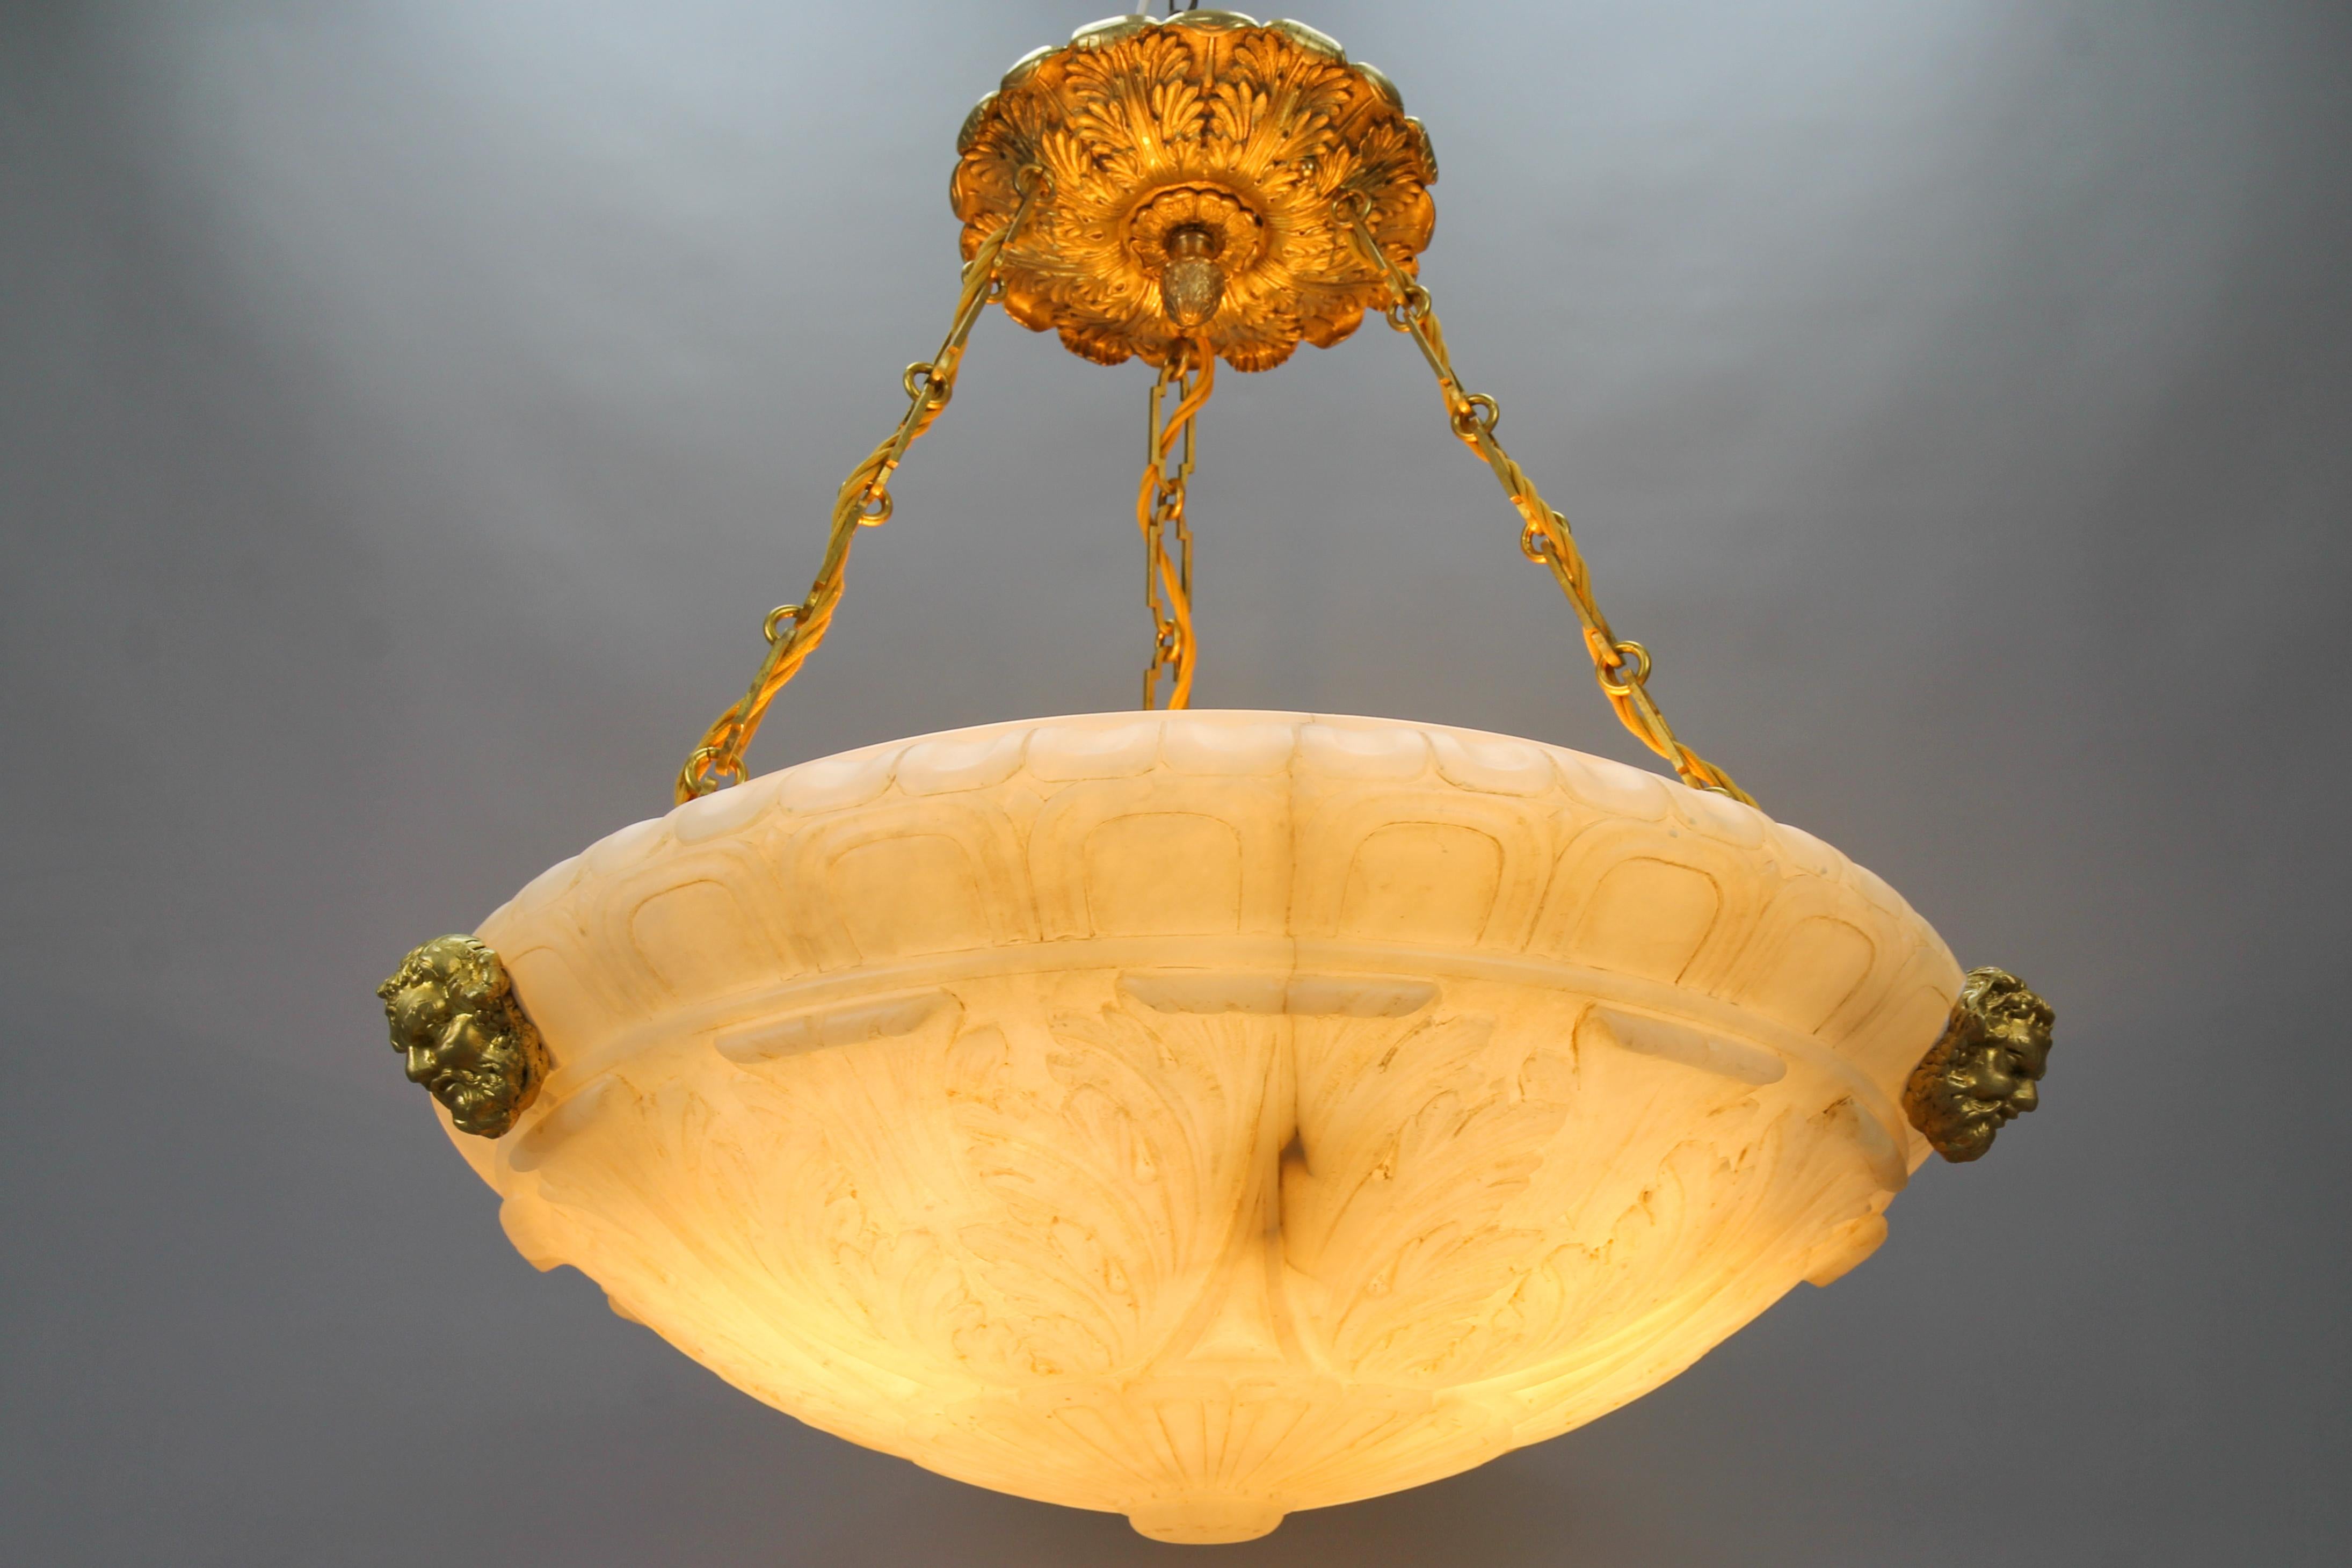 Large French Neoclassical style alabaster and bronze pendant light fixture, ca. 1890.
An impressive late 19th-century alabaster ceiling pendant light. The extra large, beautiful, and masterfully carved soft white/ivory tone alabaster bowl features